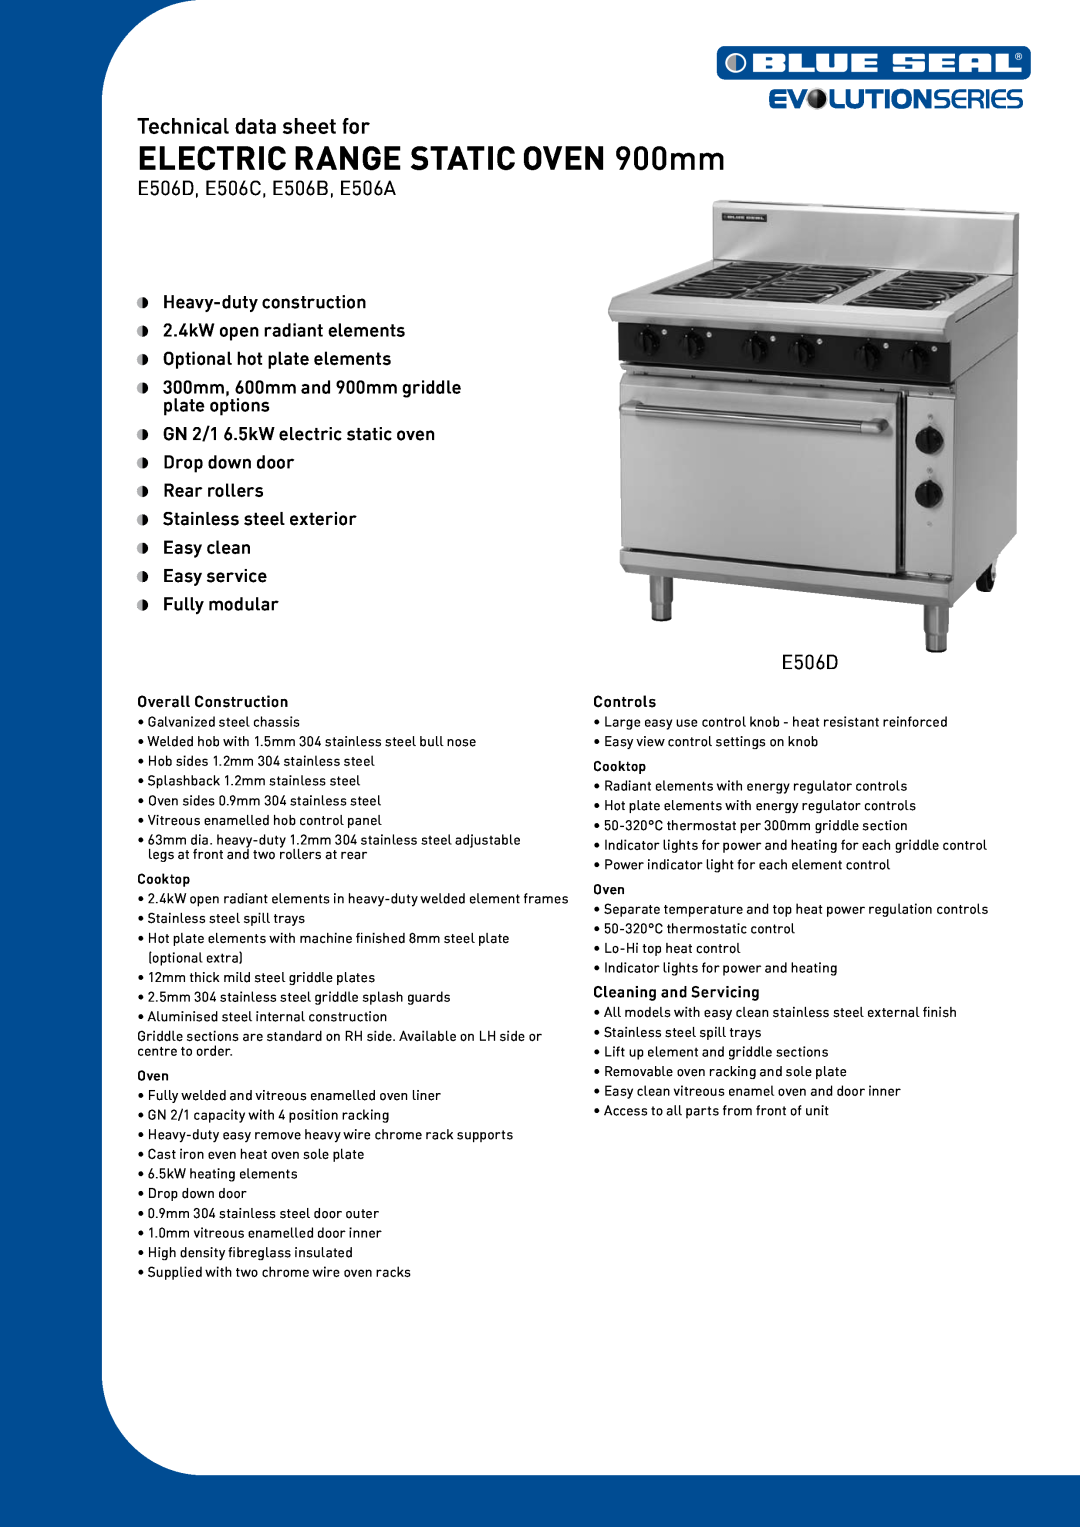 Moffat E506C manual ELECTRIC RANGE STATIC OVEN 900mm, Technical data sheet for, Overall Construction, Controls, E506D 